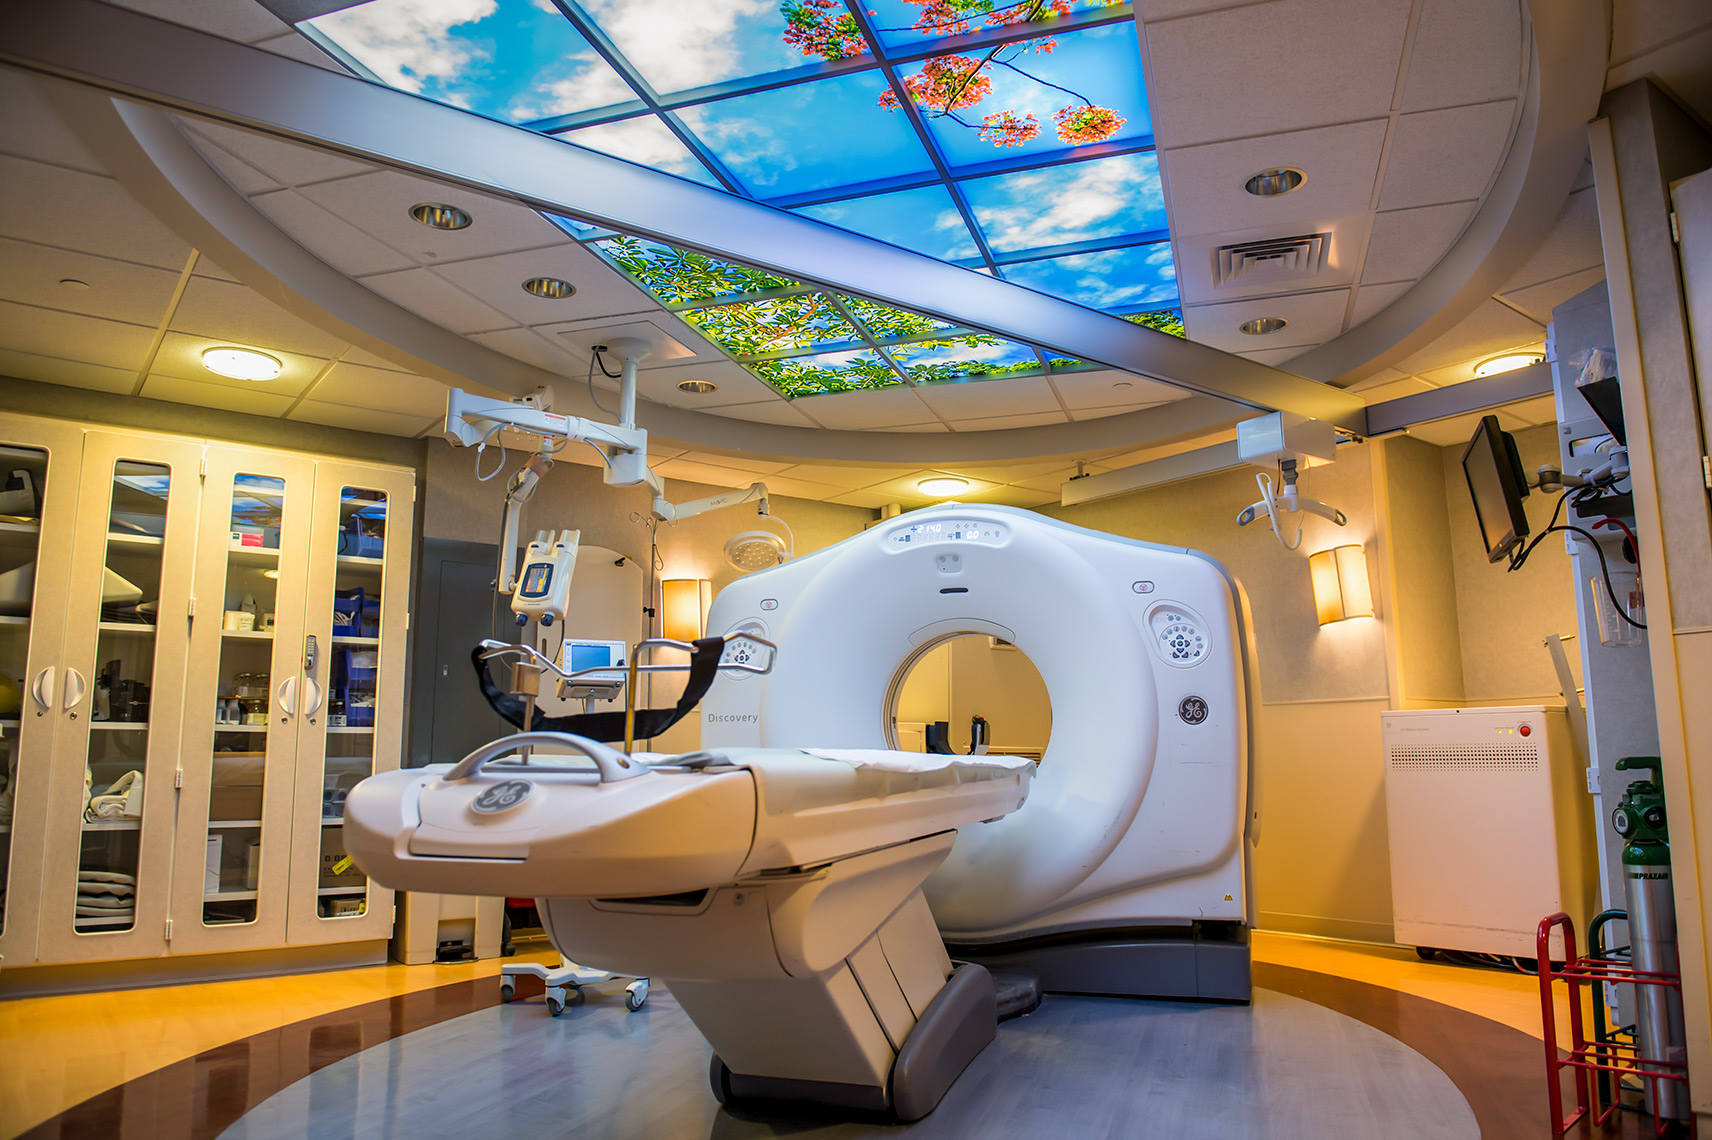 GE Discovery Scanner in hospital with faux windows on ceiling